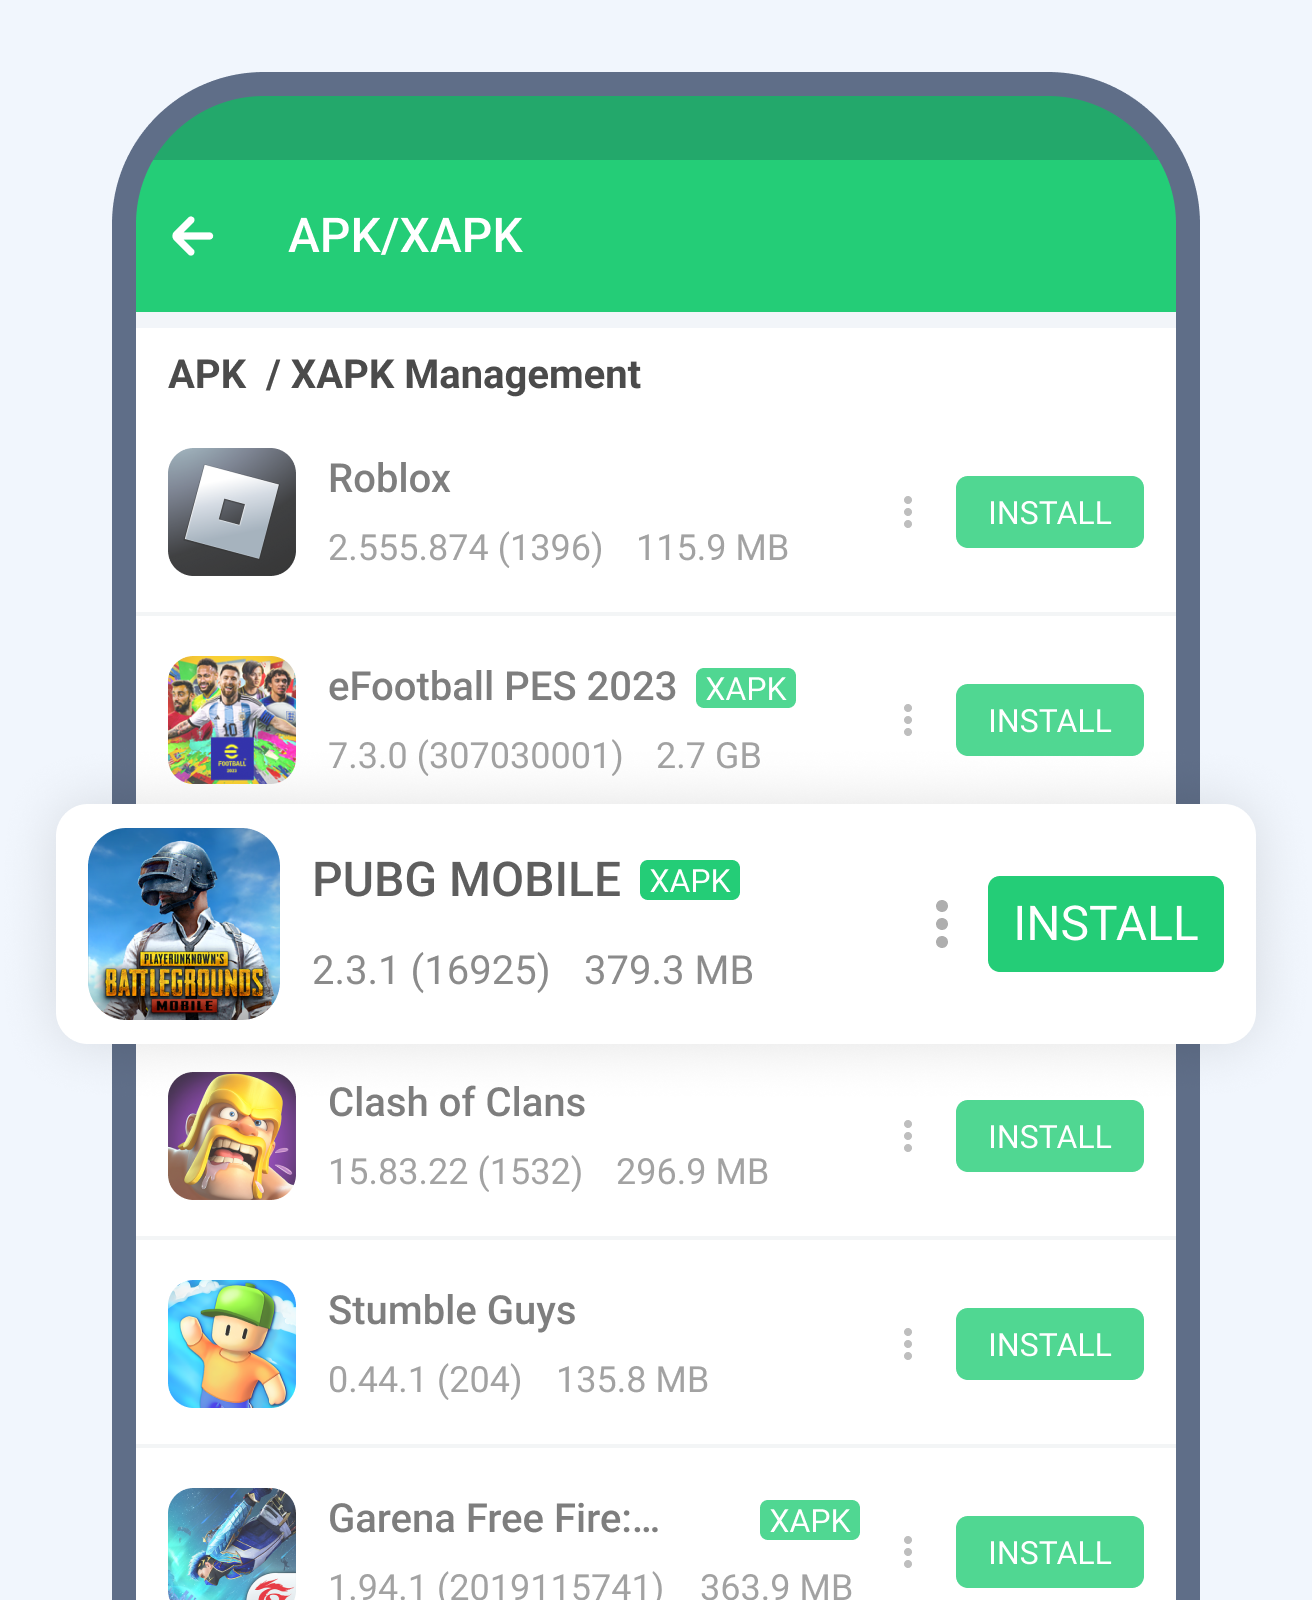 How to Install Games with APK and DATA/OBB files Android